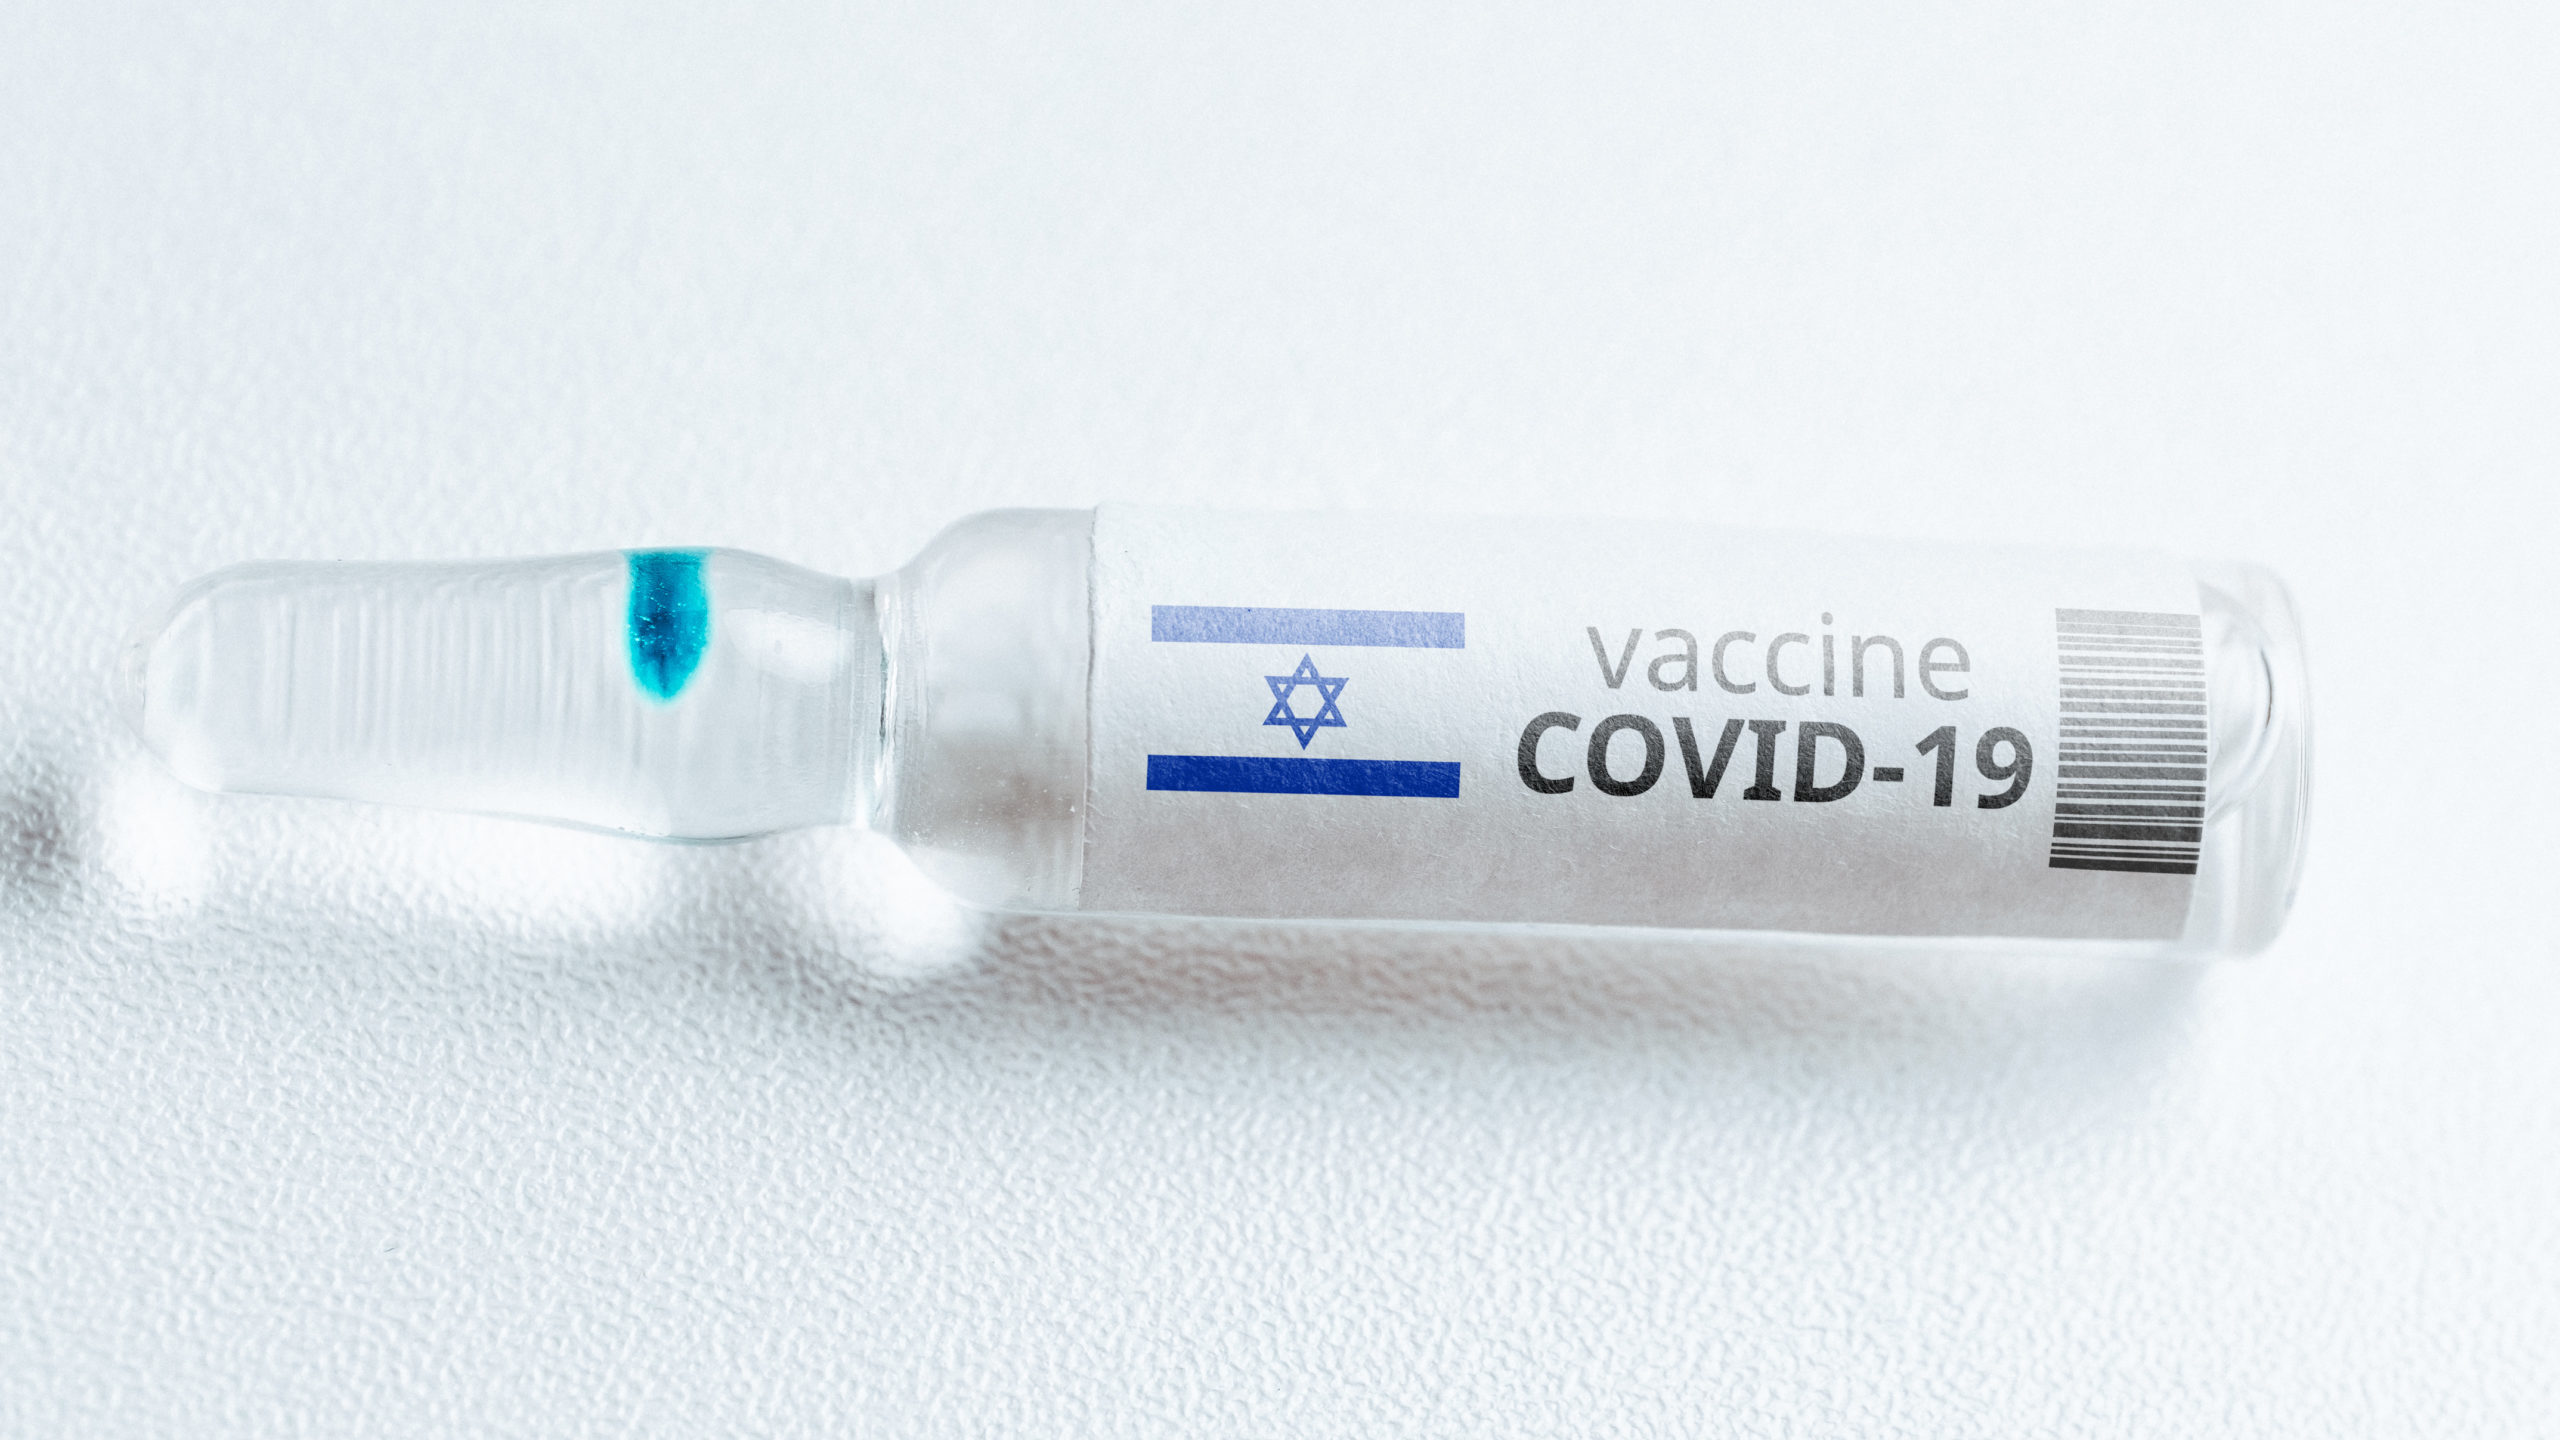 Cases, Deaths Climb While Vaccinations Proceed in Israel 